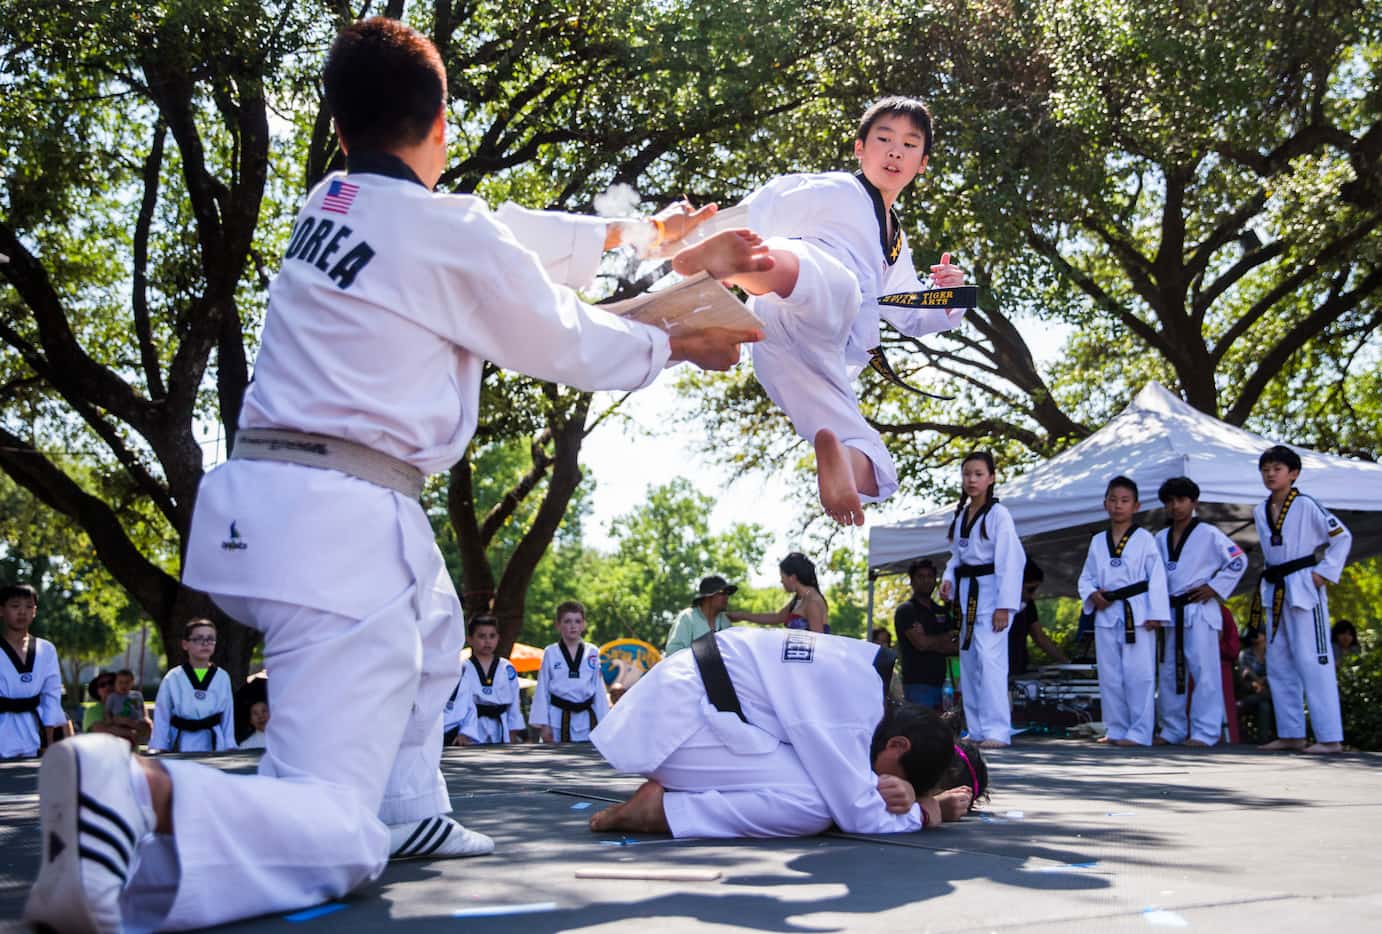 Ayden Nguyen, 11, breaks a board held by Master Joung-Hun Bang as they perform with other...